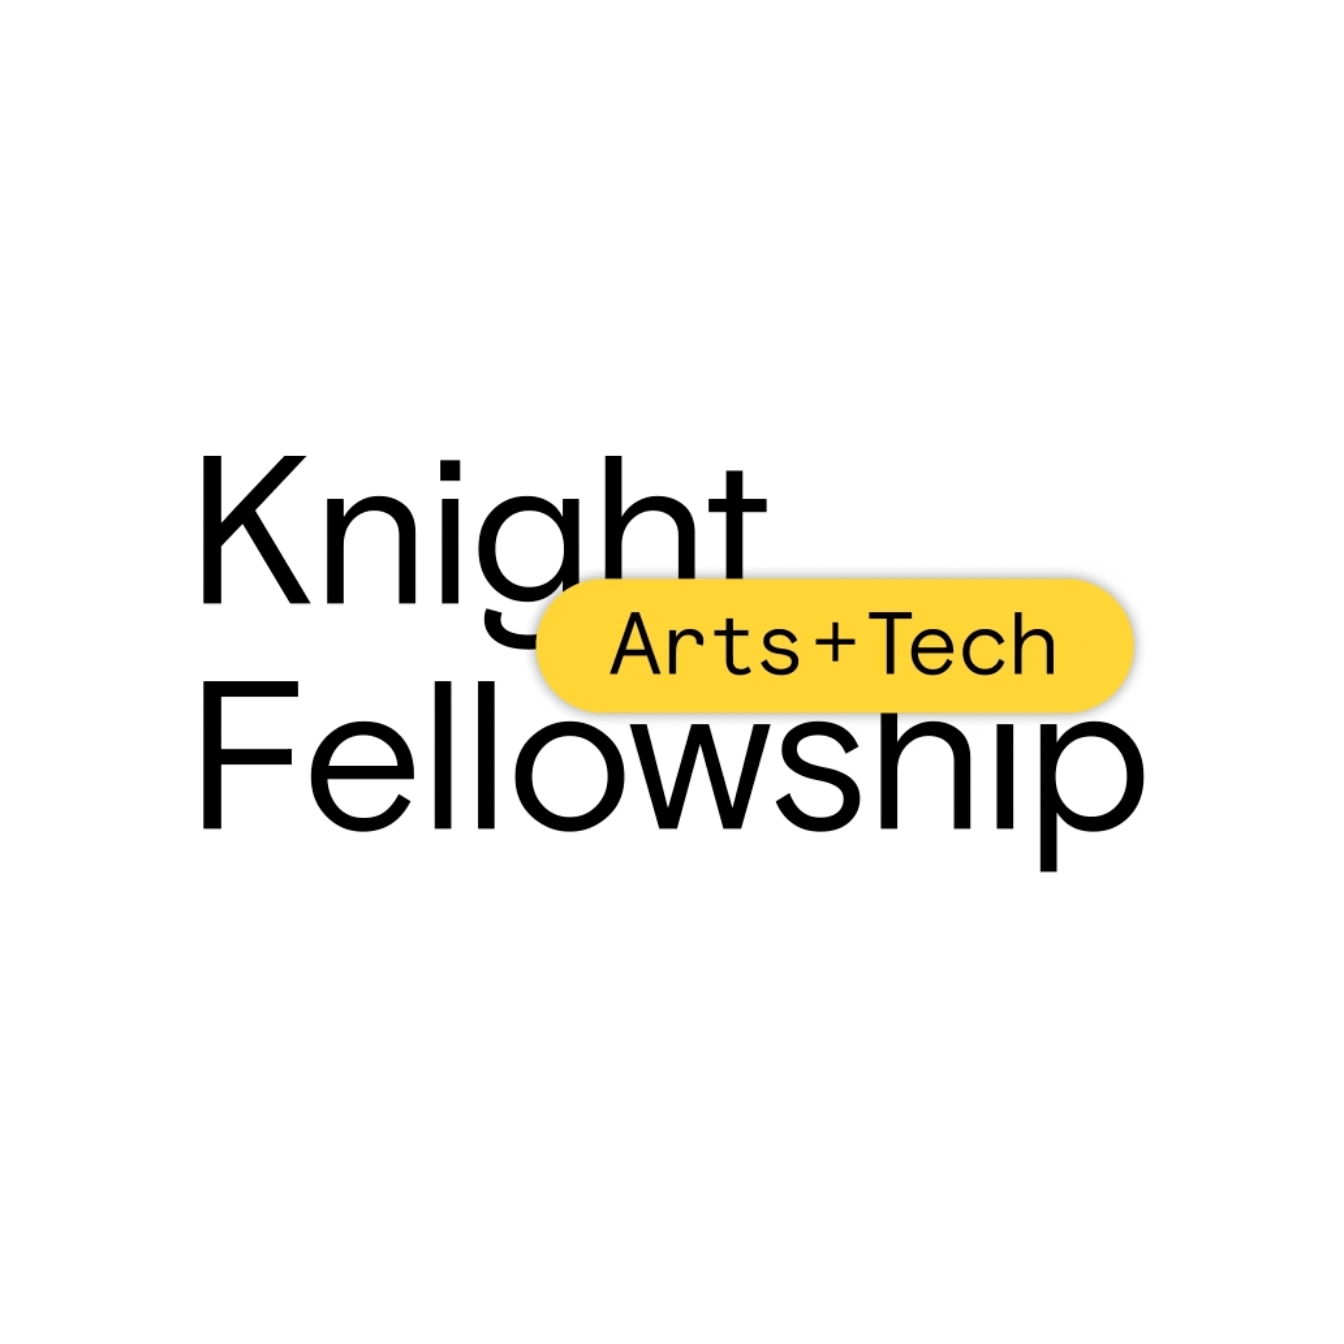 Black text "Knight Fellowship" with colorful button that says "Arts + Tech"